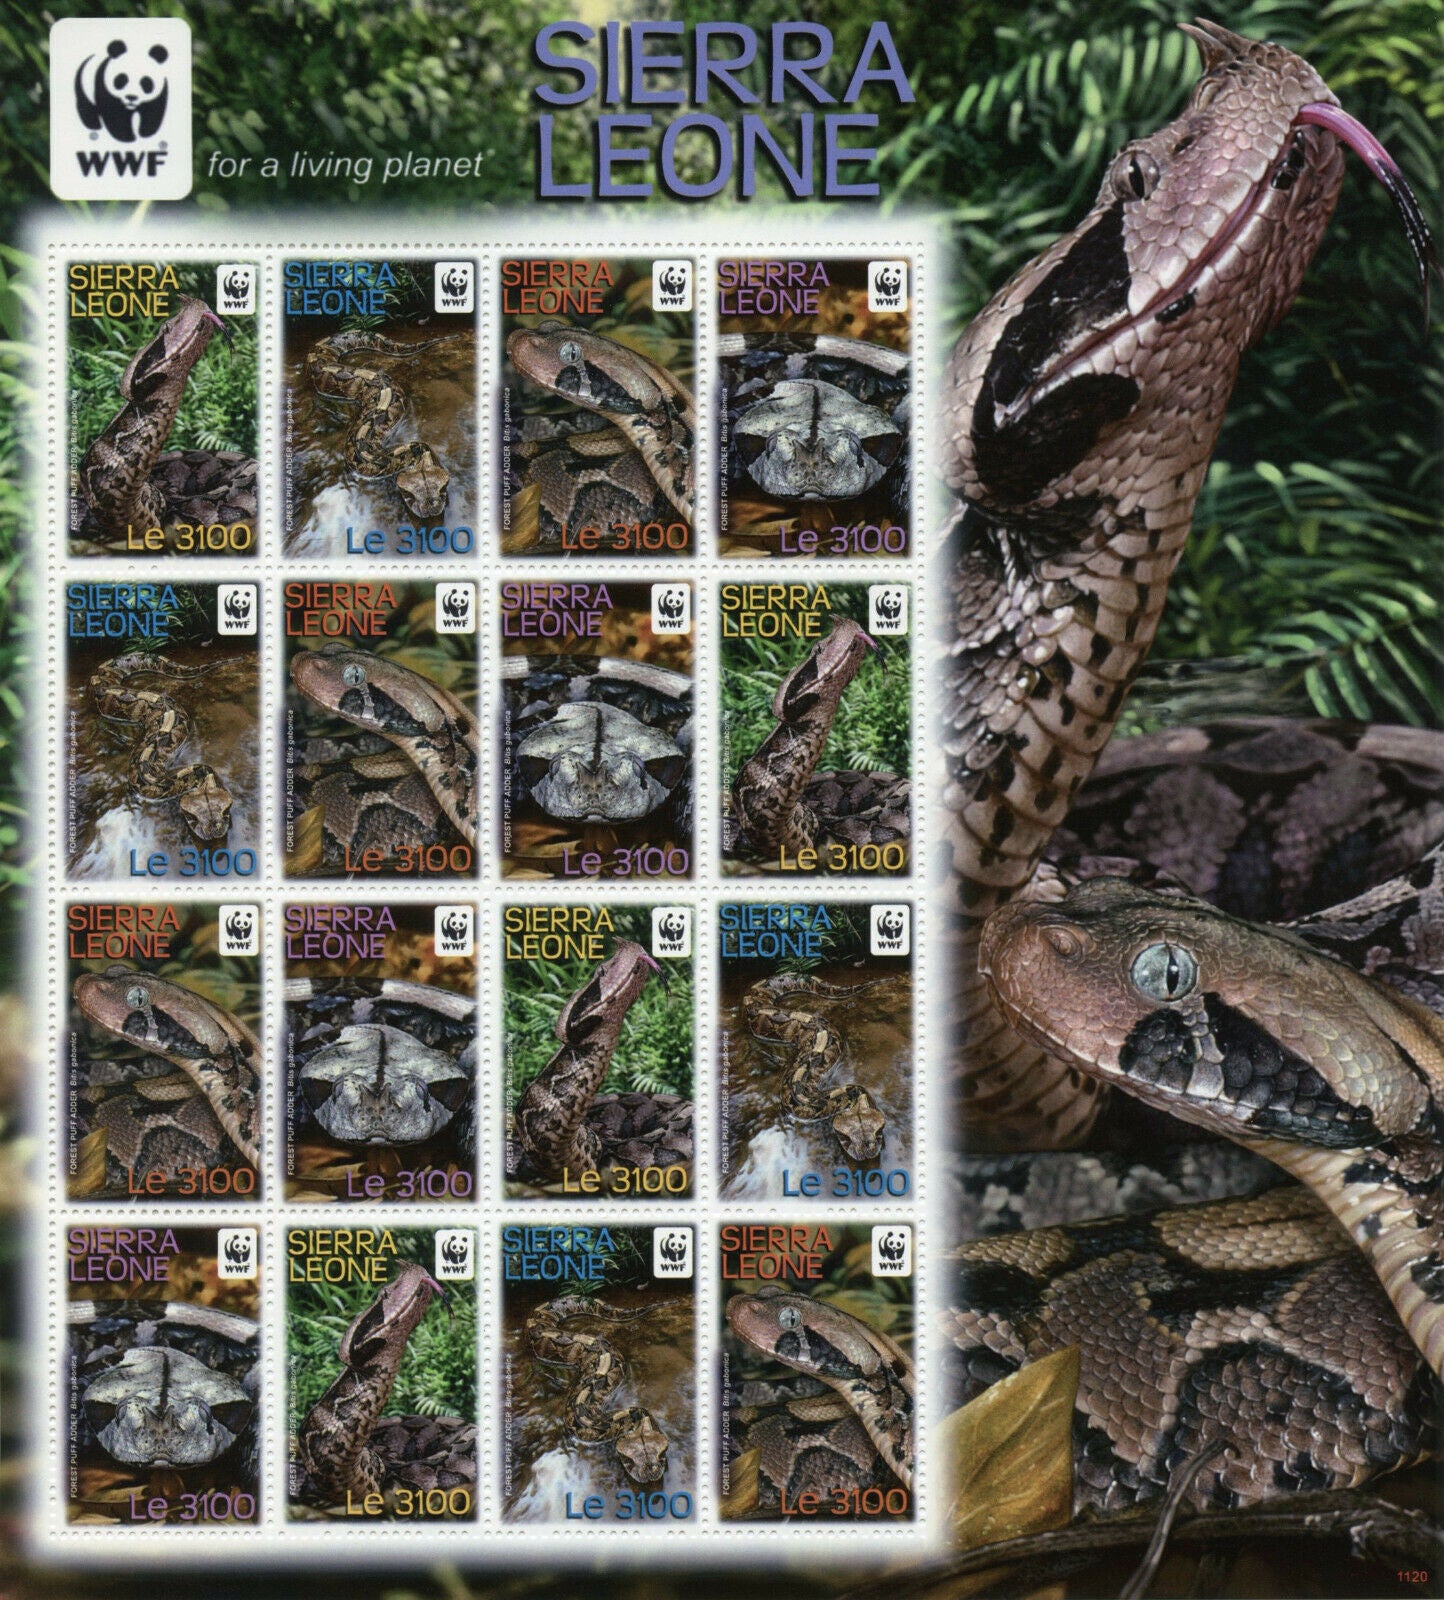 Sierra Leone WWF Stamps 2011 MNH Forest Puff Adder Snakes Reptiles 16v M/S